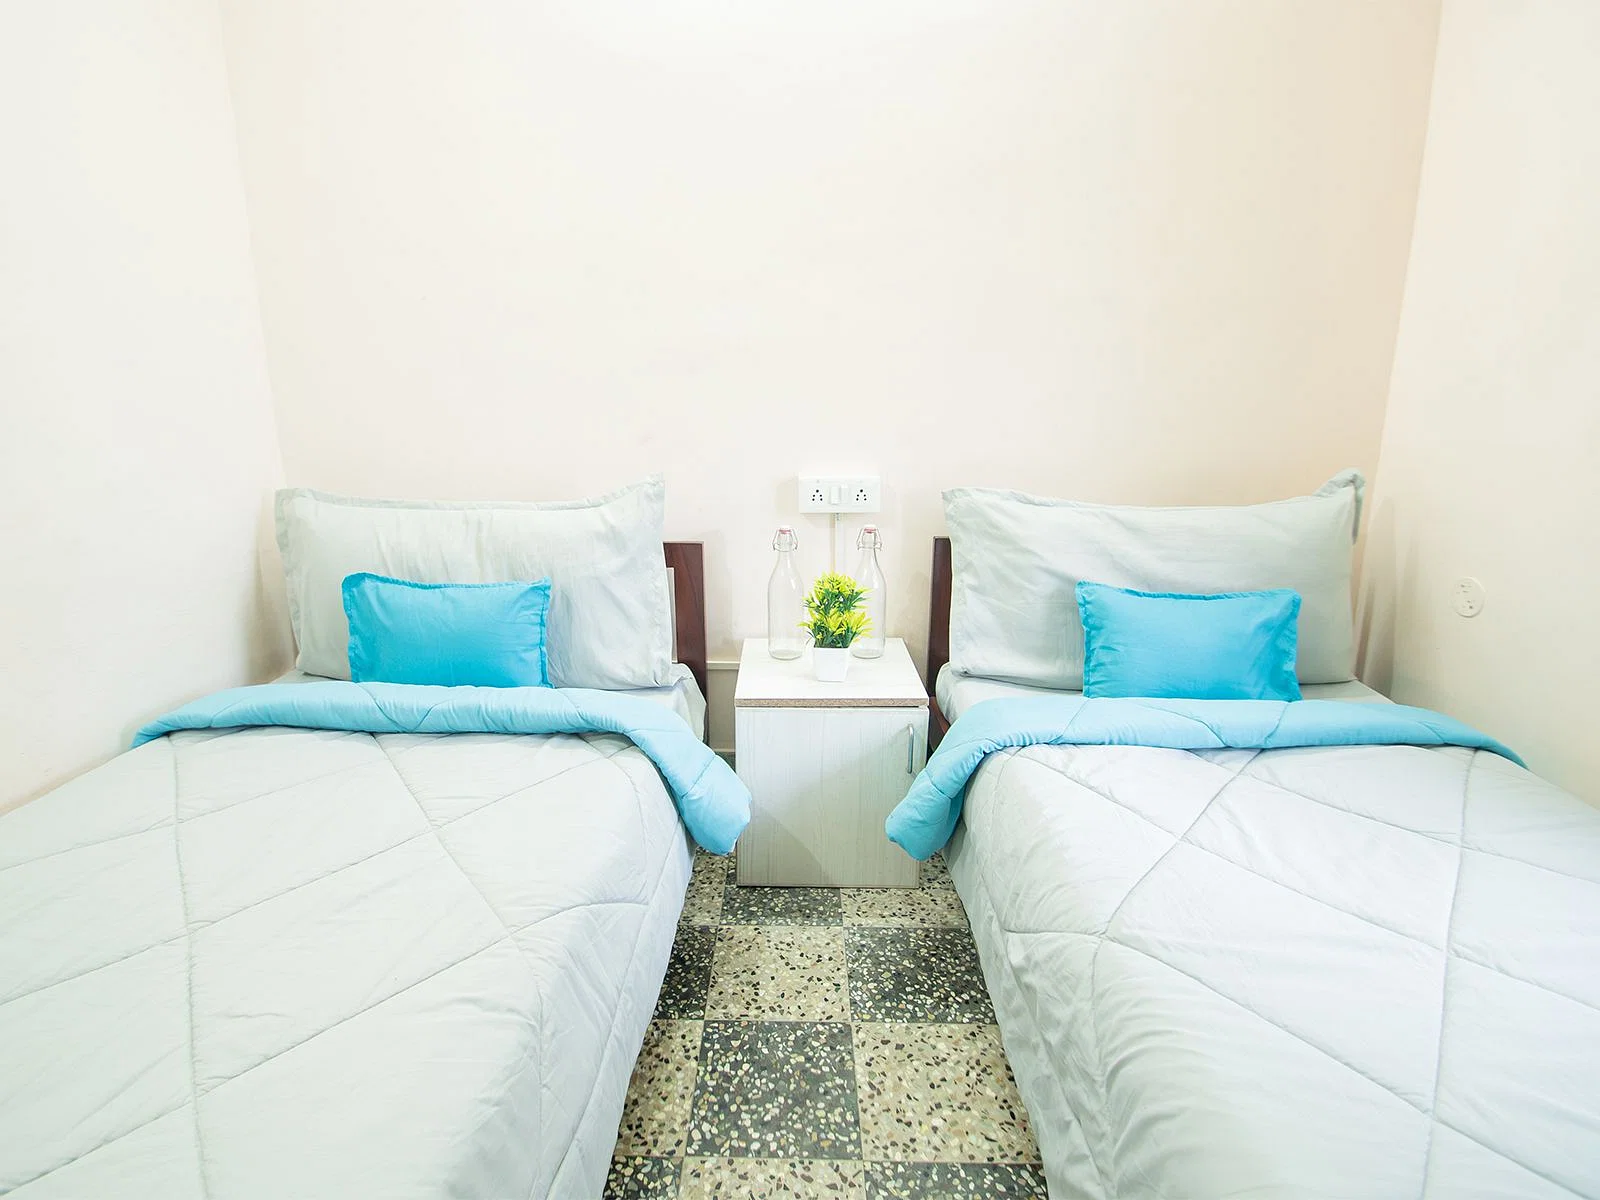 luxury PG accommodations with modern Wi-Fi, AC, and TV in West saidapet-Chennai-Zolo Rozzby B